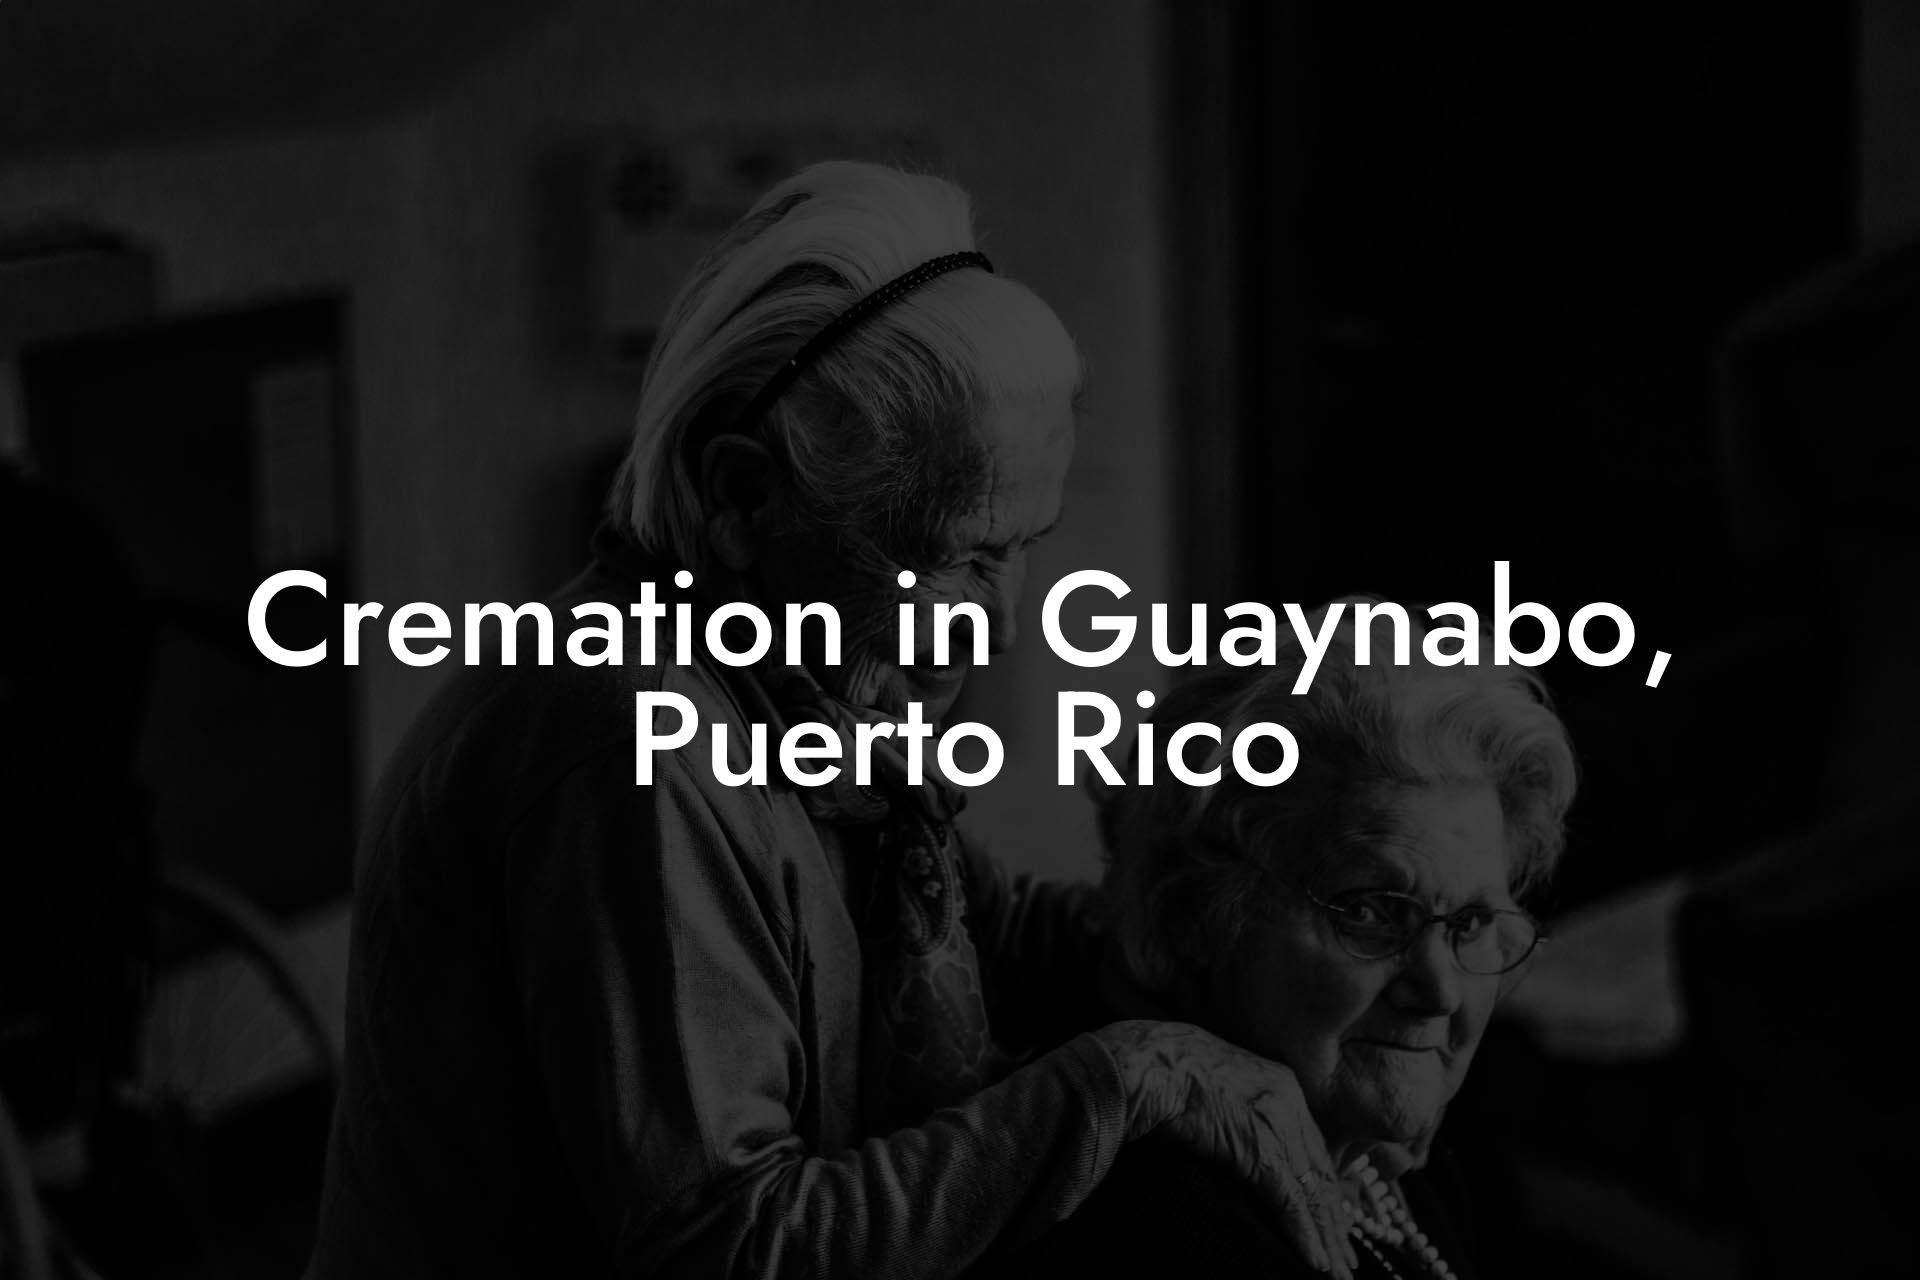 Cremation in Guaynabo, Puerto Rico